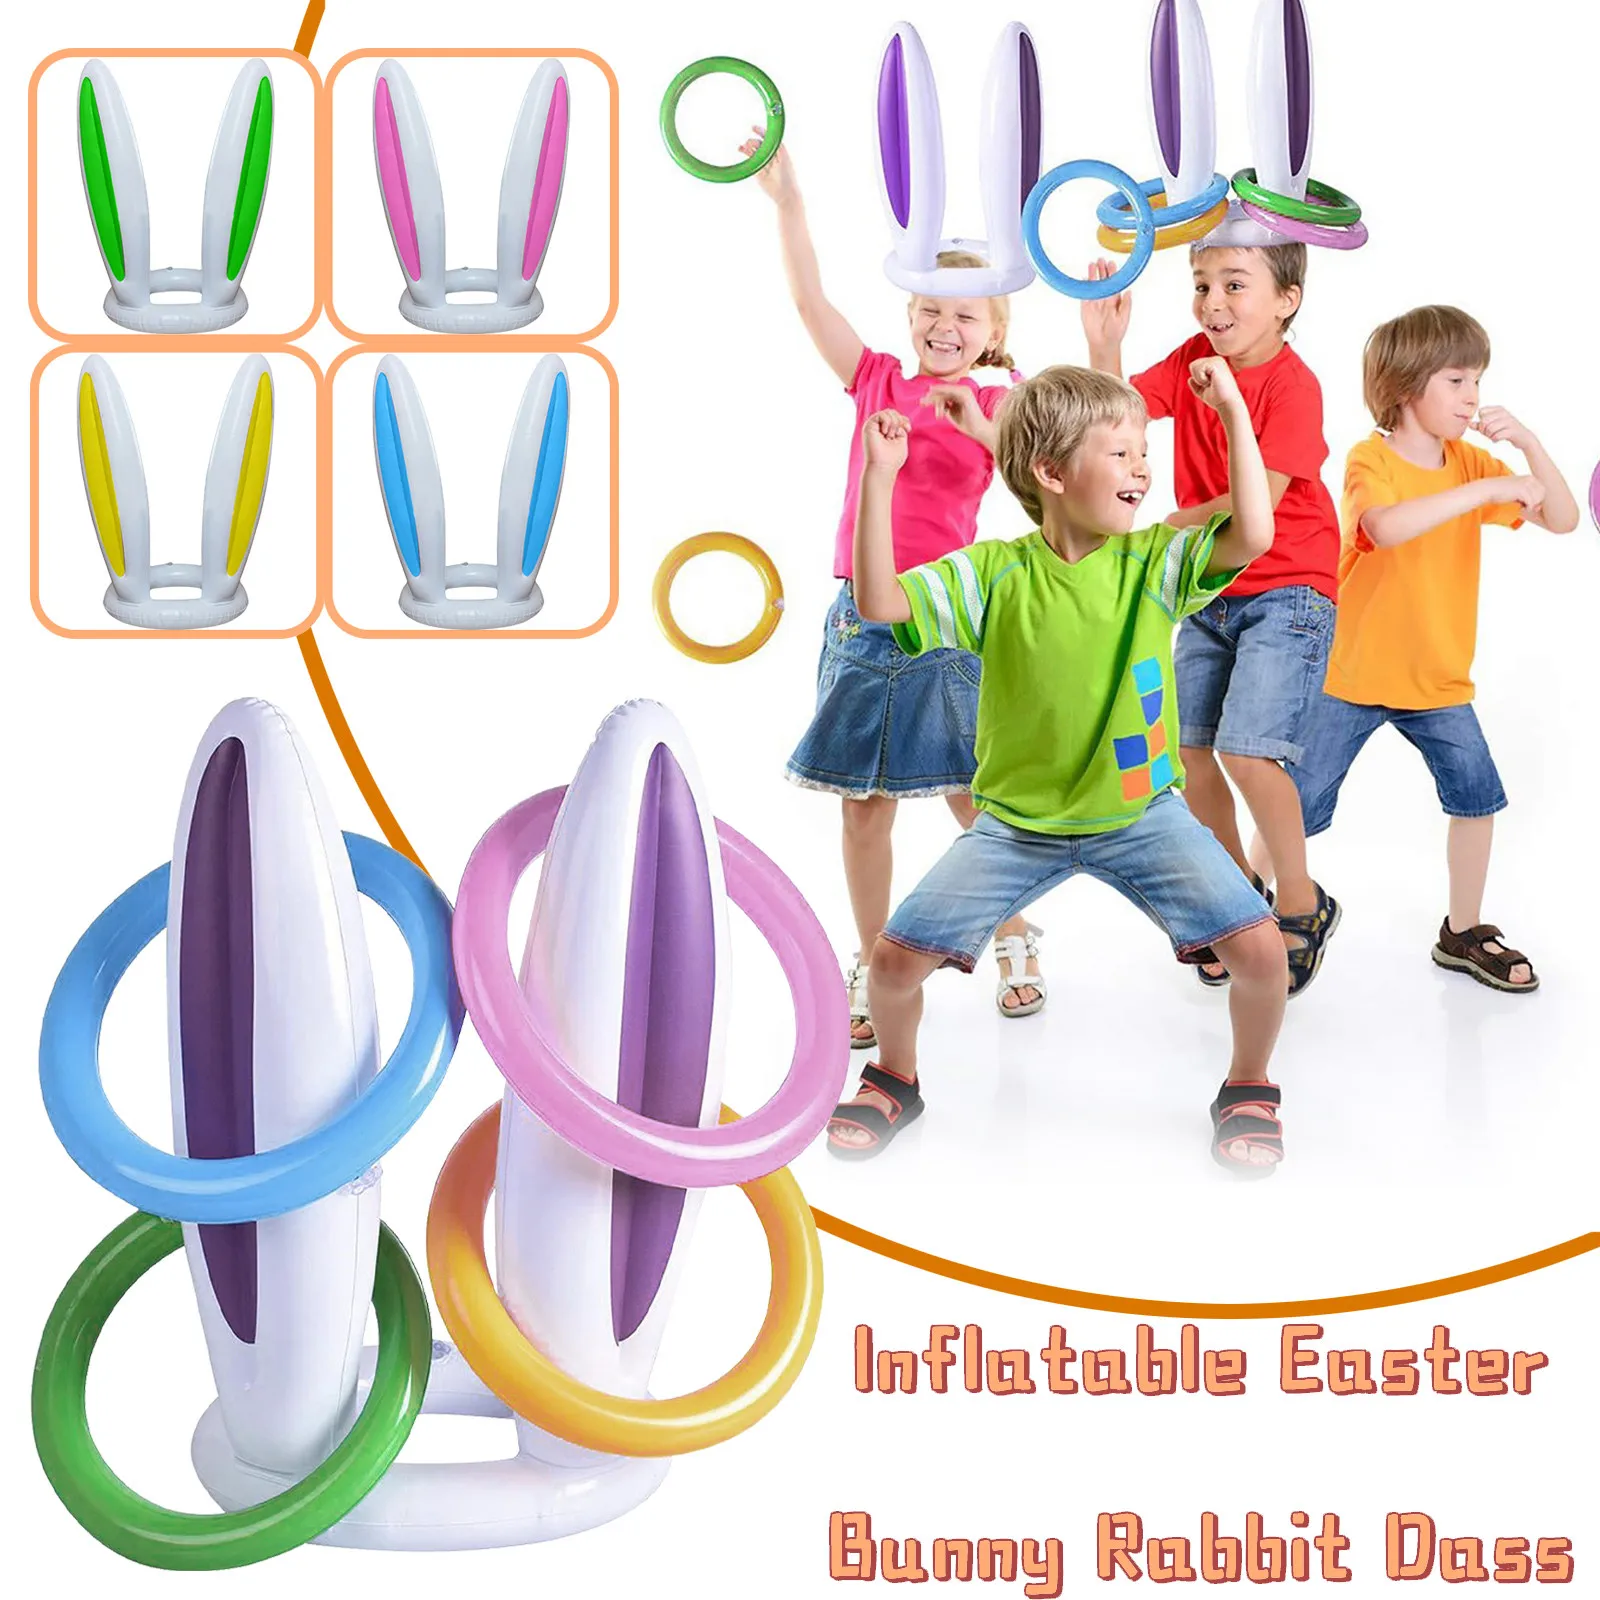 YANSHON Inflatable Bunny Rabbit Ears Ring Toss Game 2 Rabbit Ears and 12 Rings Rabbit Ear Hats and Rings Inflatable Bunny Ear Hat and Rings for Easter Party Favors 